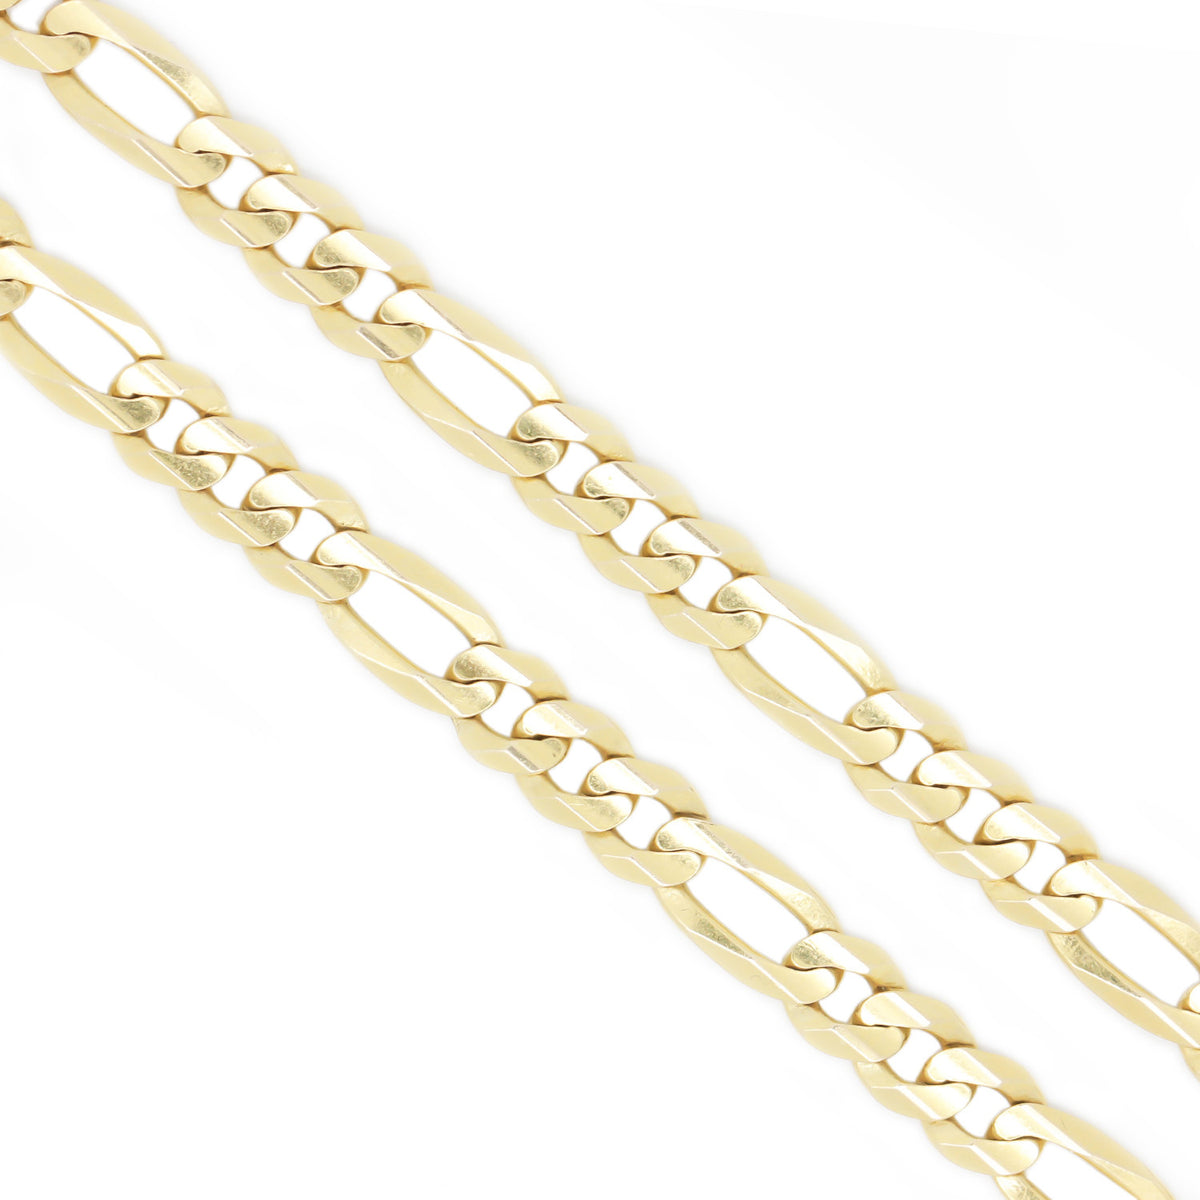 14K Yellow Gold 7.0 mm Figaro Chain Necklace 22 Inches